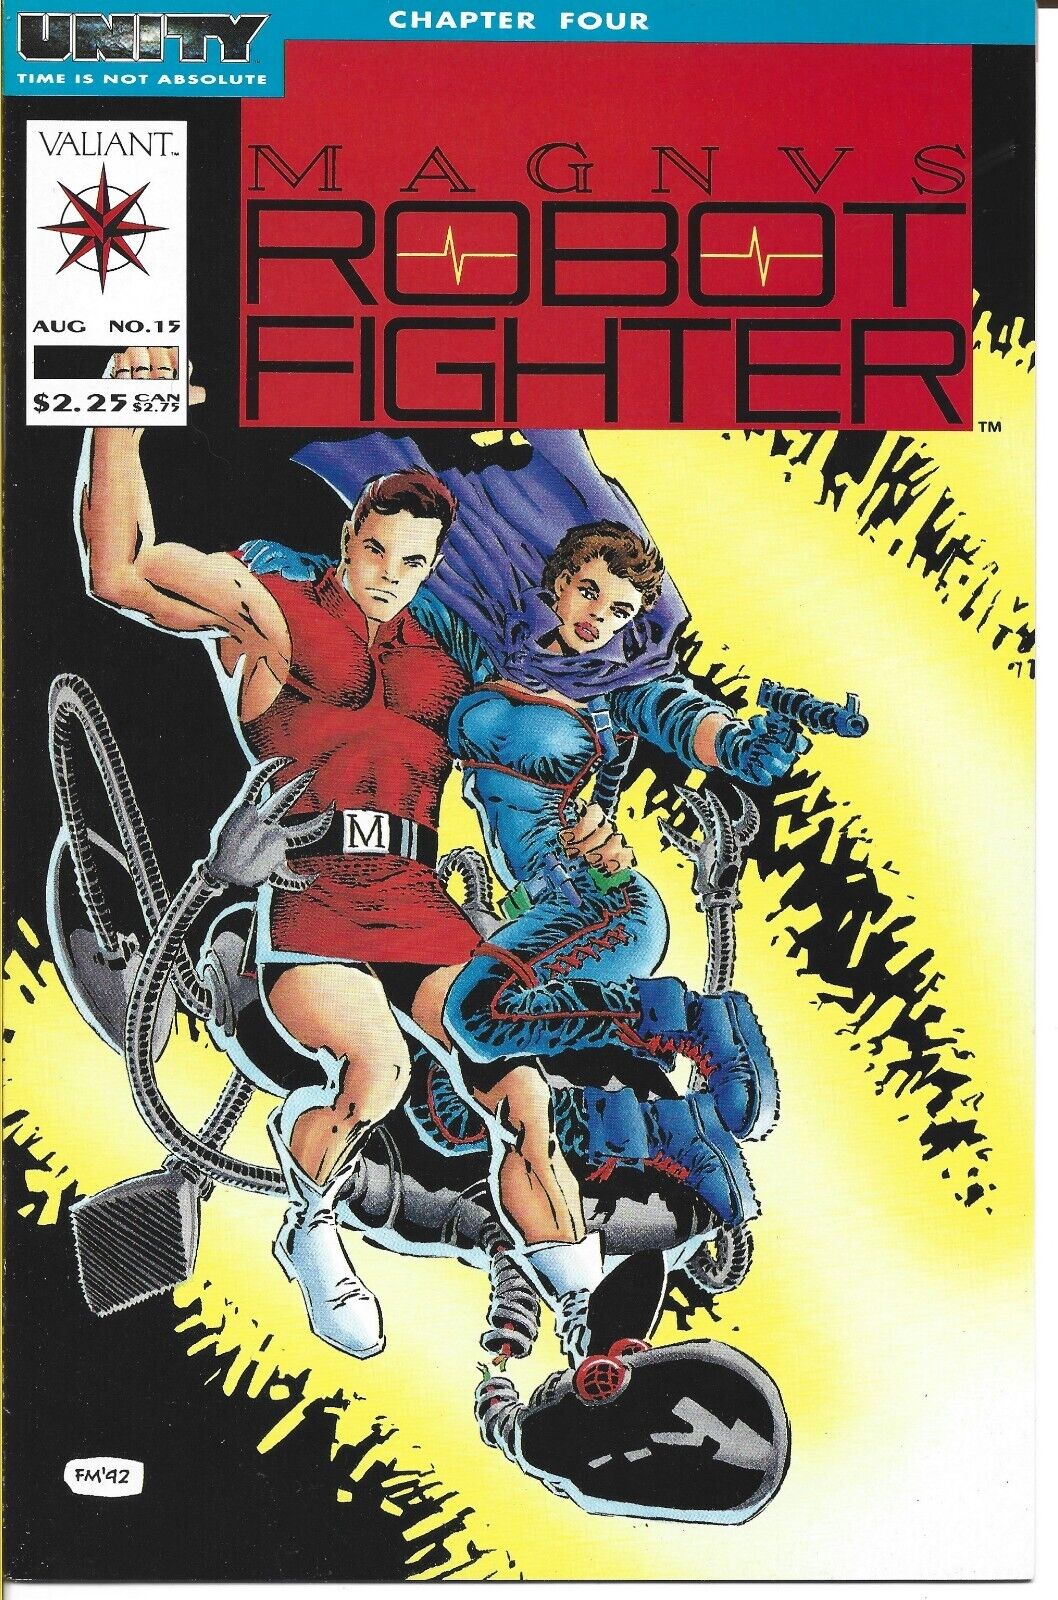 MAGNUS ROBOT FIGHTER #15 VALIANT COMICS 1992 BAGGED AND BOARDED